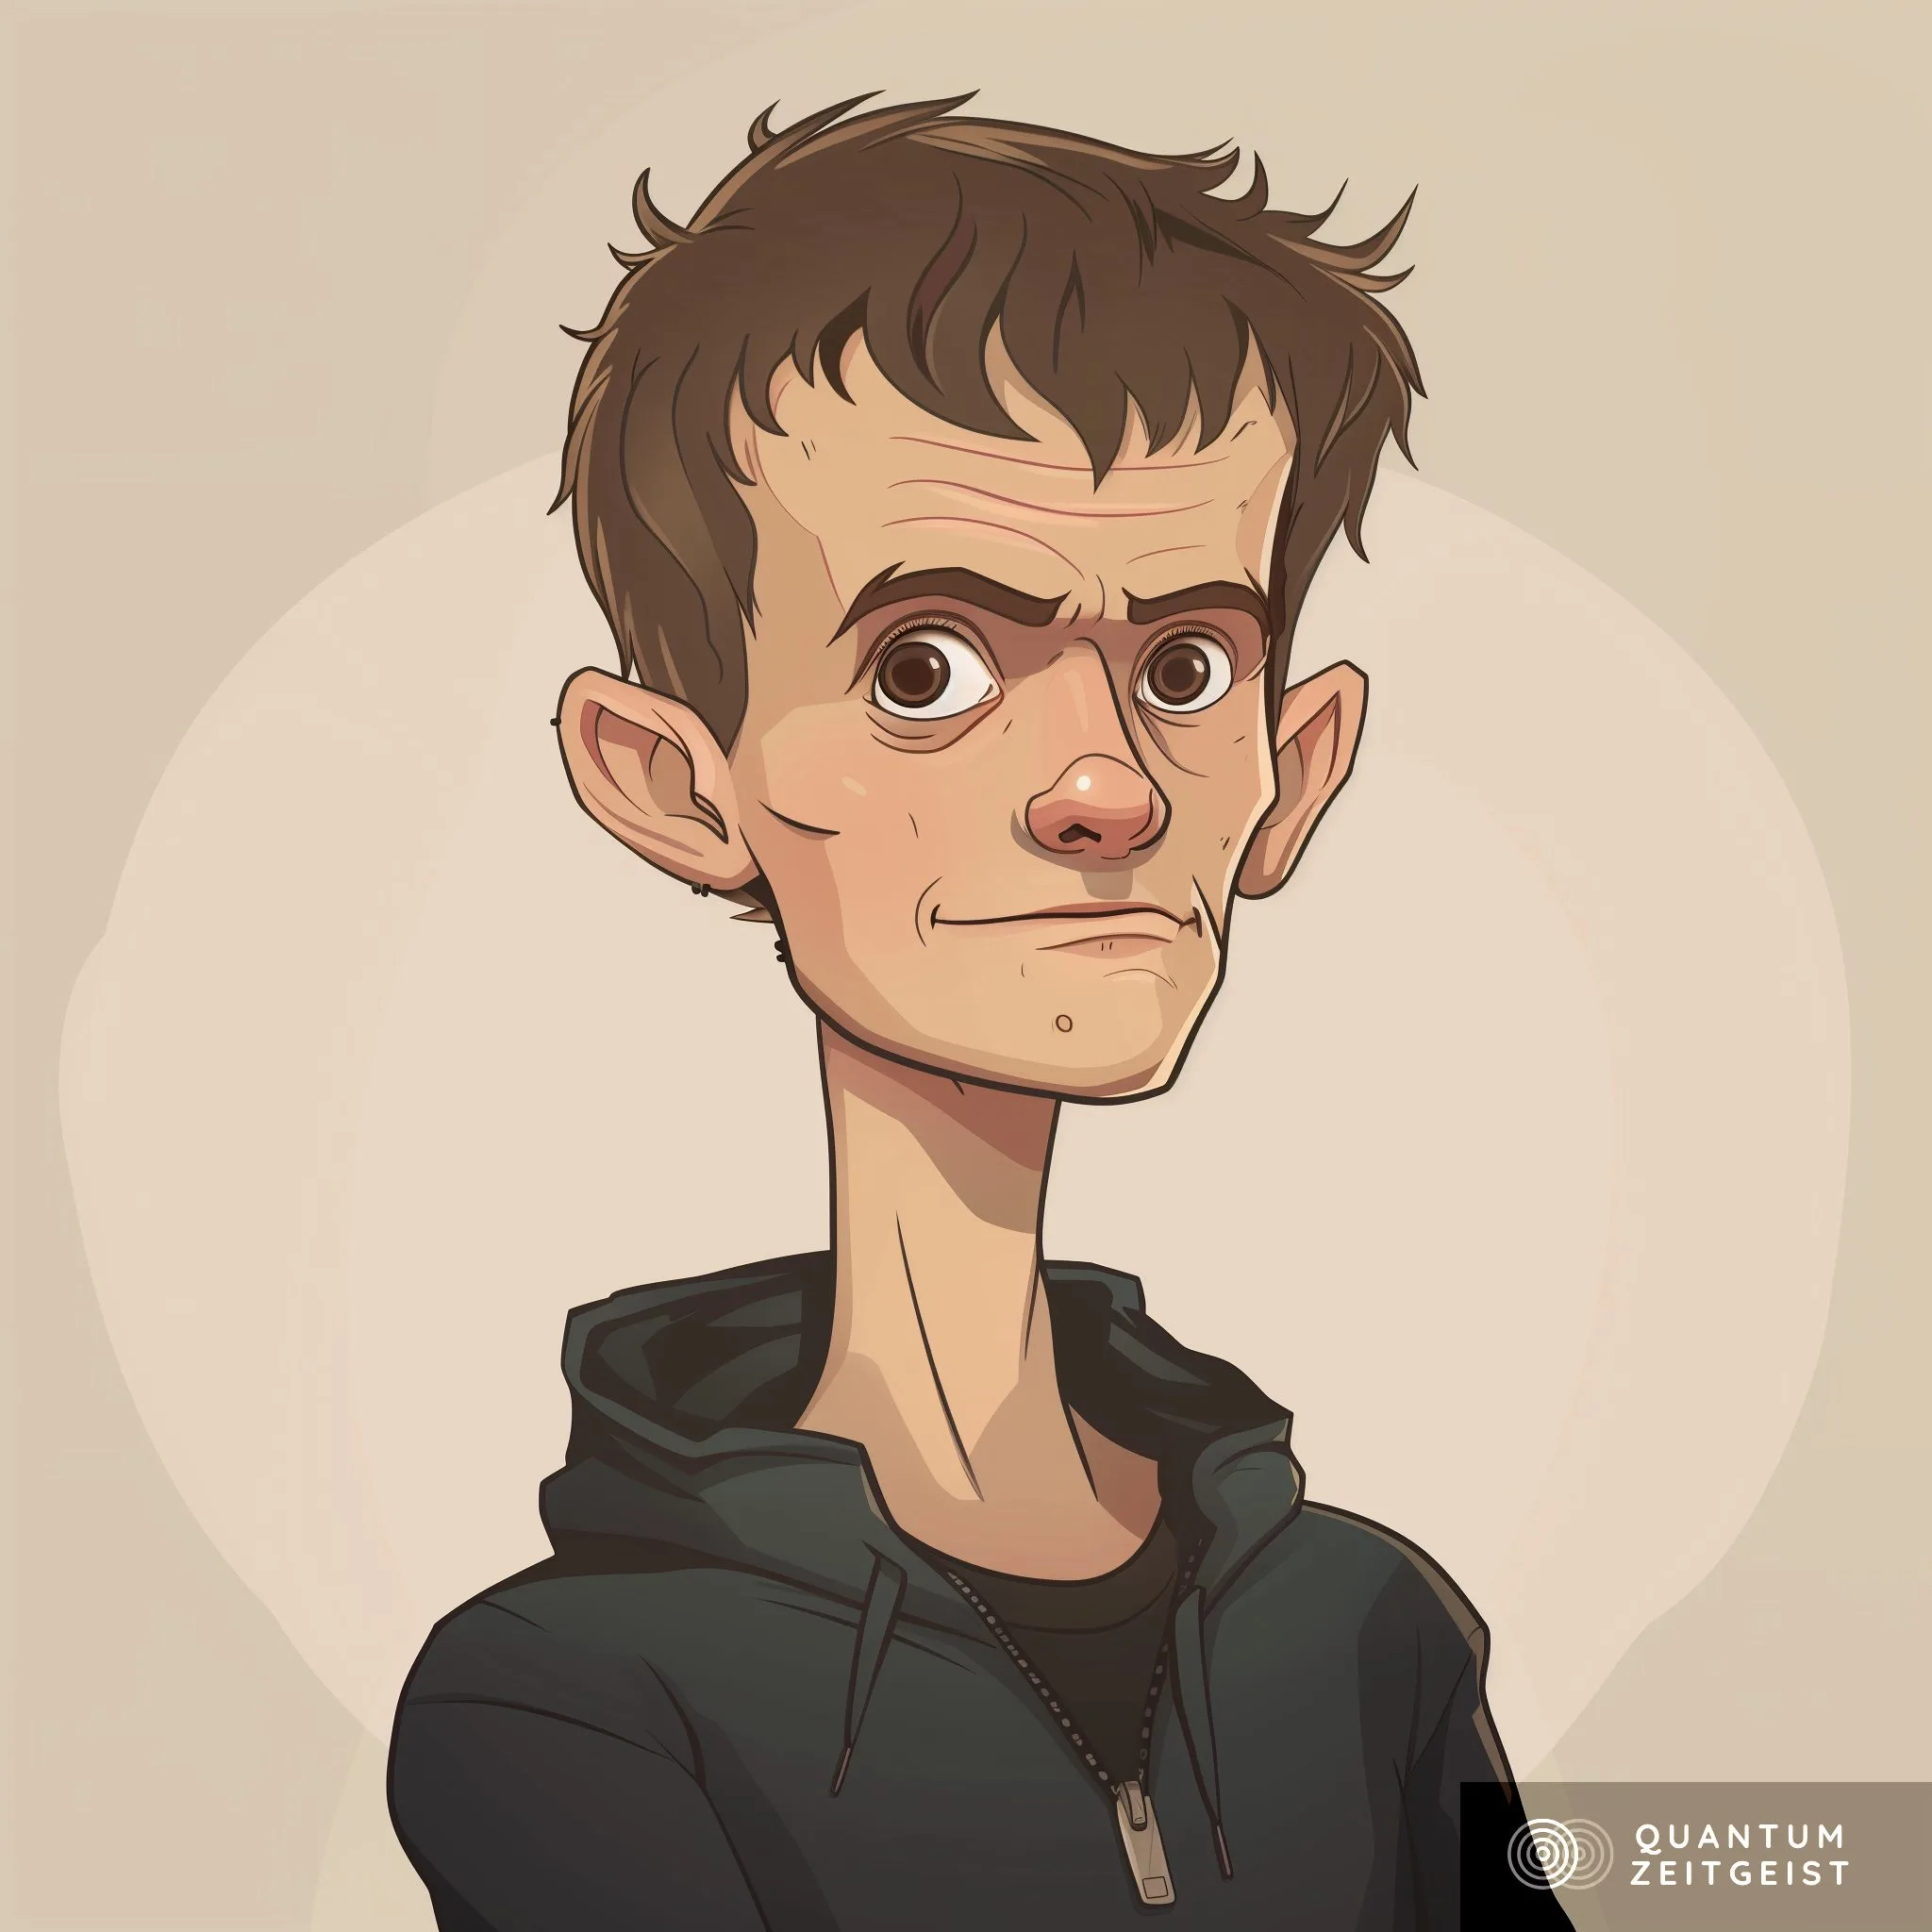 Vitalik Buterin. The Founder Of Crypto Currency: Ethereum.